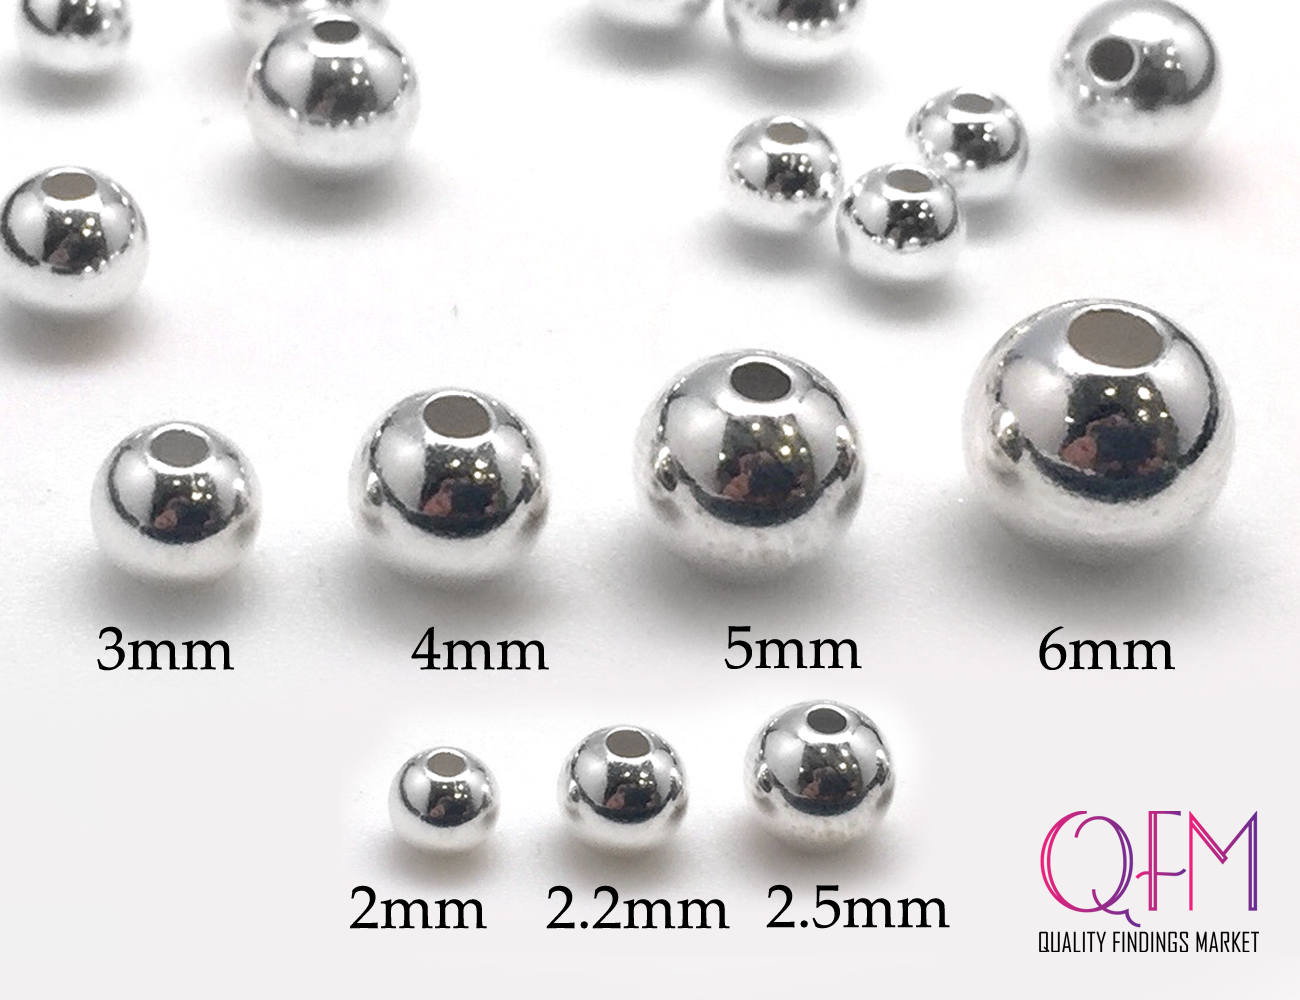 100pcs Silver Stainless Steel DIY Beads Smooth Spacer Beads Findings 5*2mm 